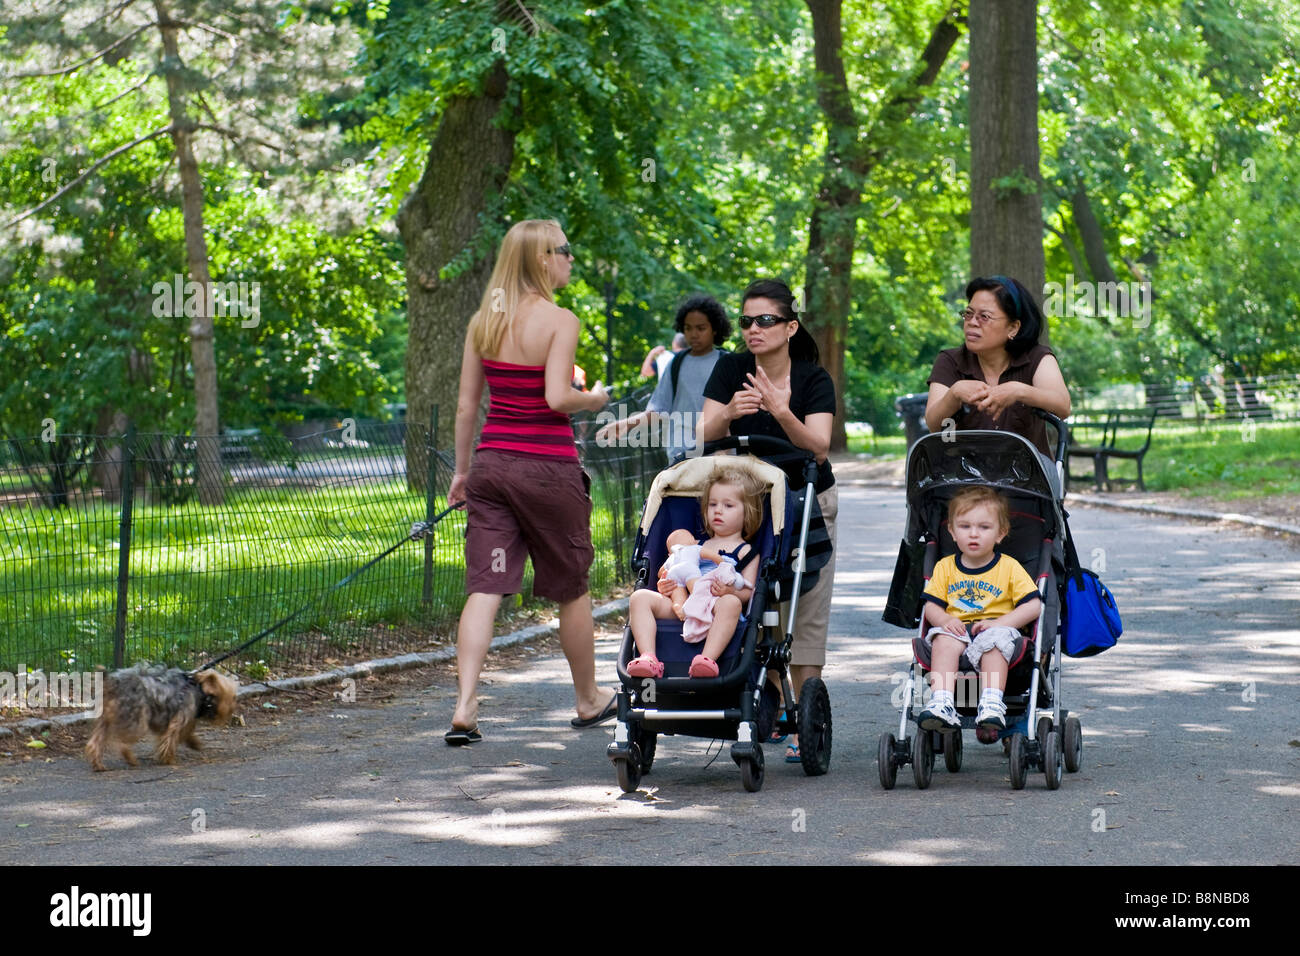 Two women pushing toddlers in strollers and a woman walking a small dog in Central park Stock Photo